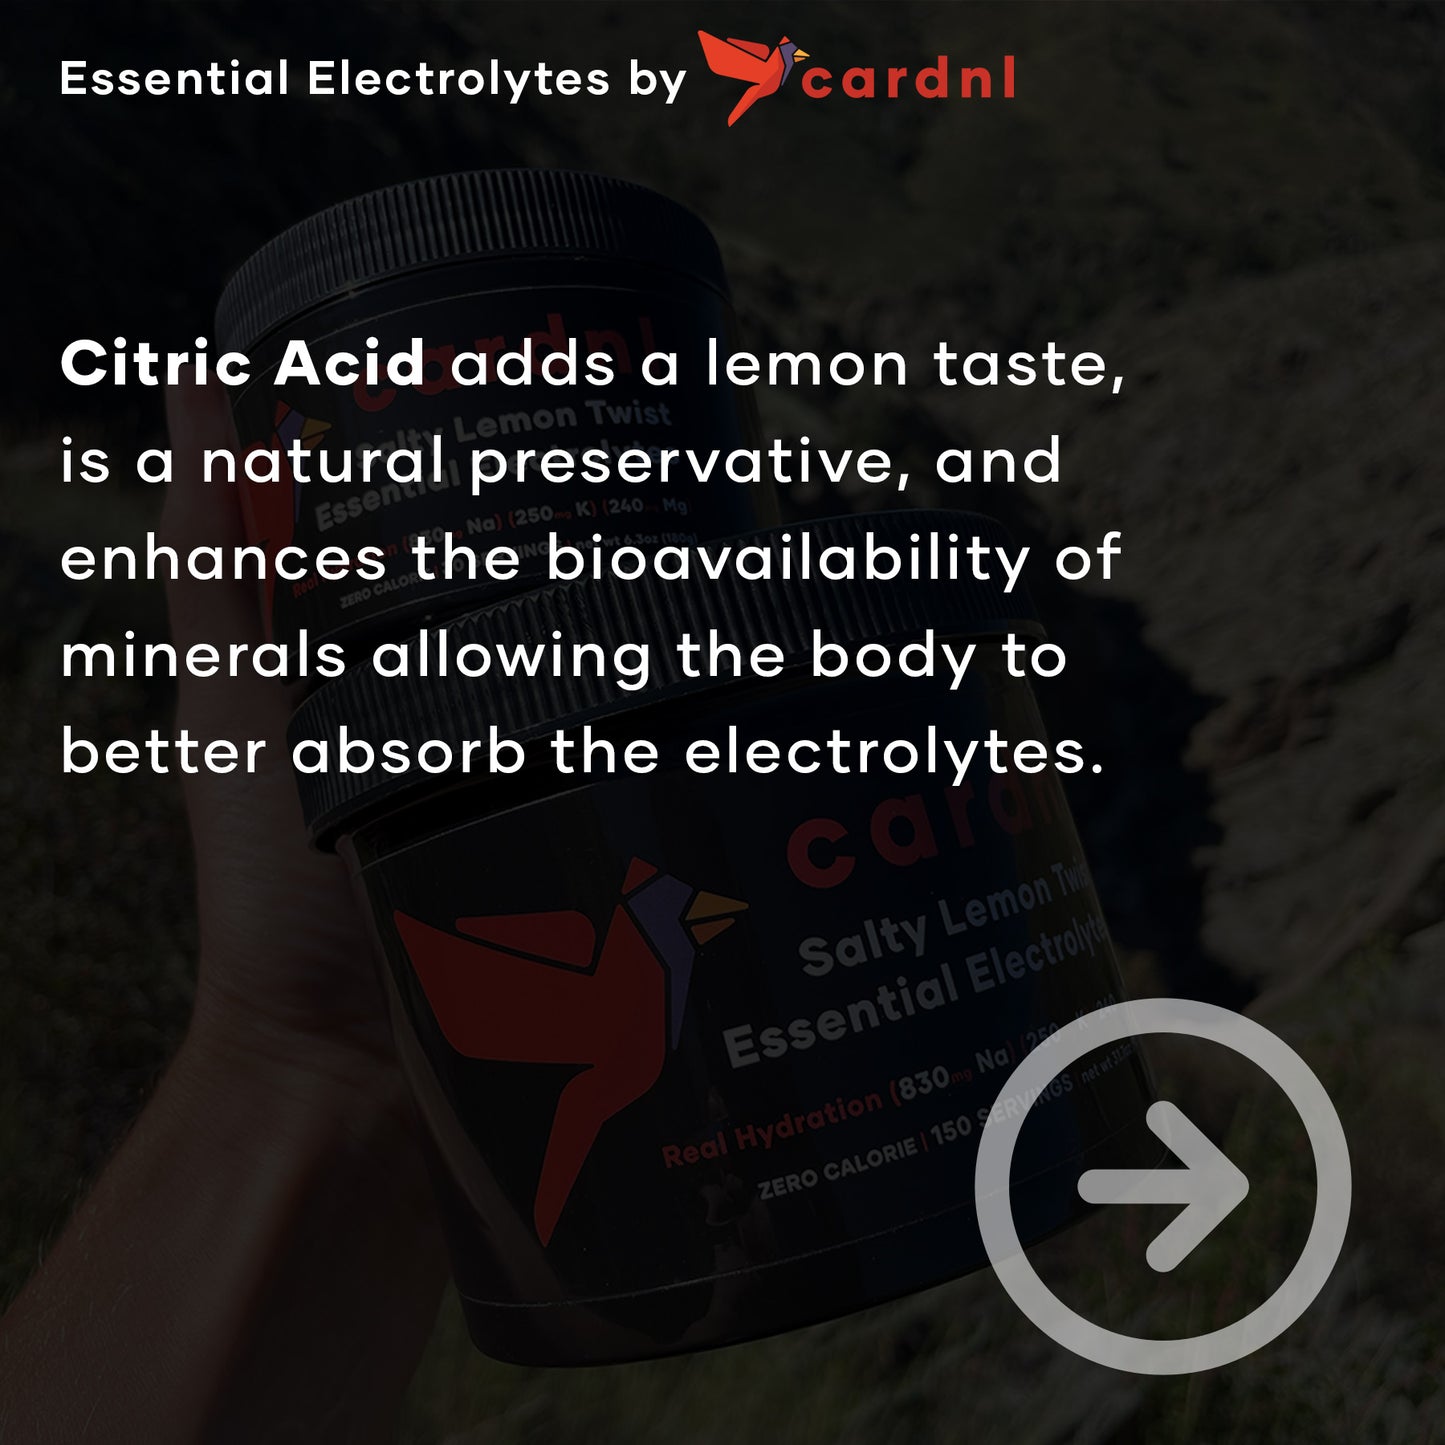 Citric acid adds a lemon taste, is a natural preservative, and enhances the bioavailability of minerals allowing the body to better absorb the electrolytes.